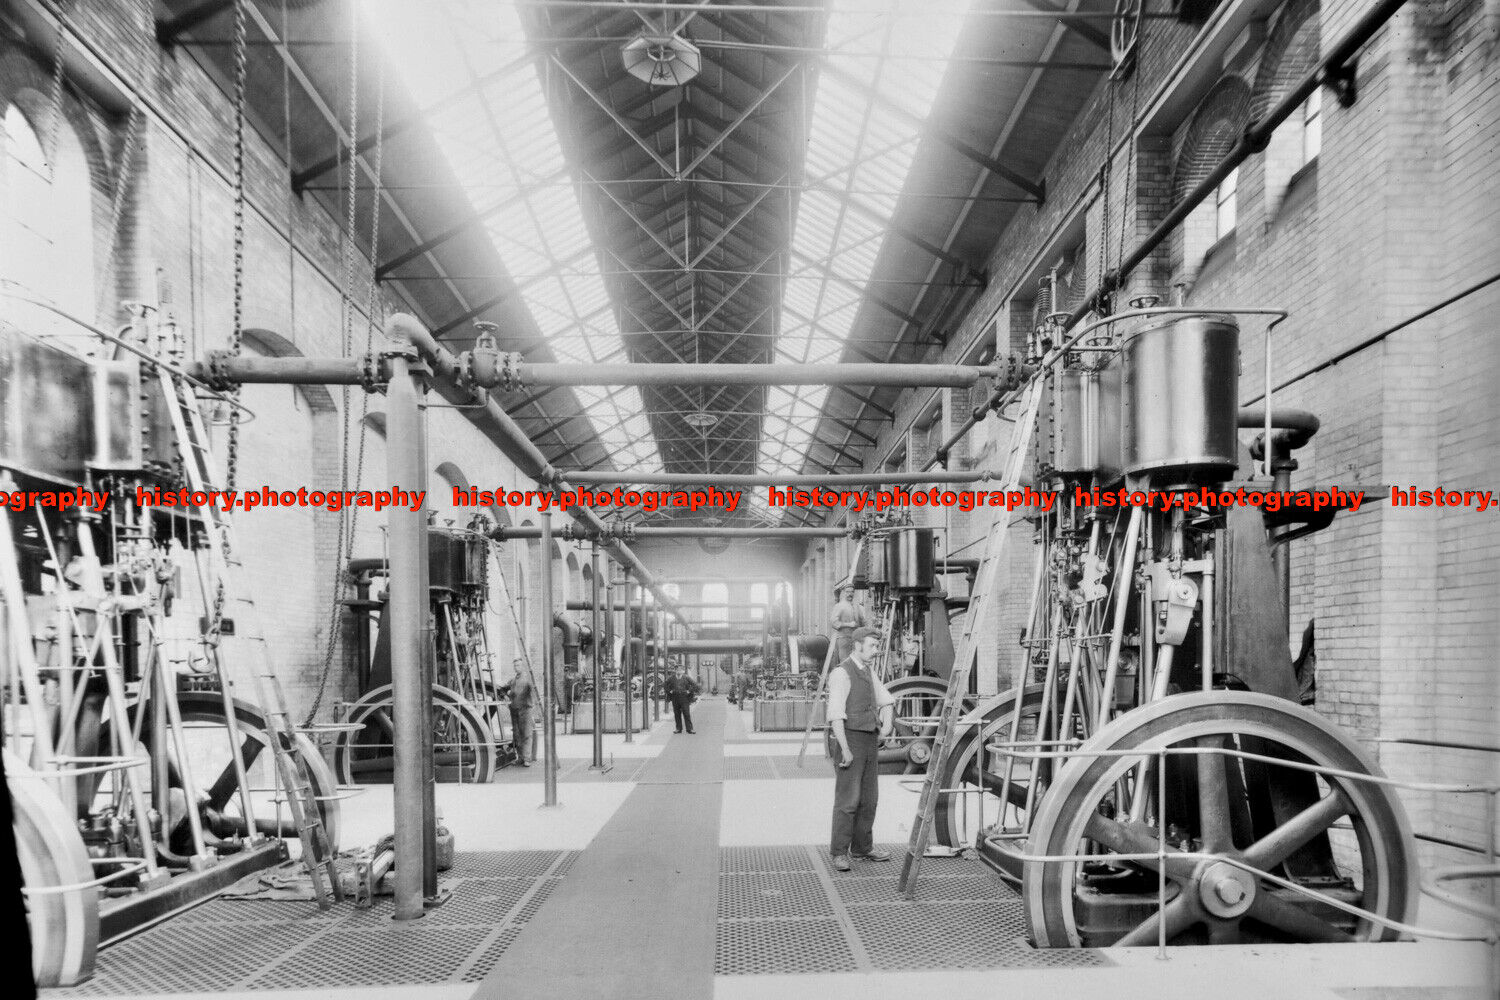 F001900 Interior of engine the house at Crossness Sewage Treatment Works. London